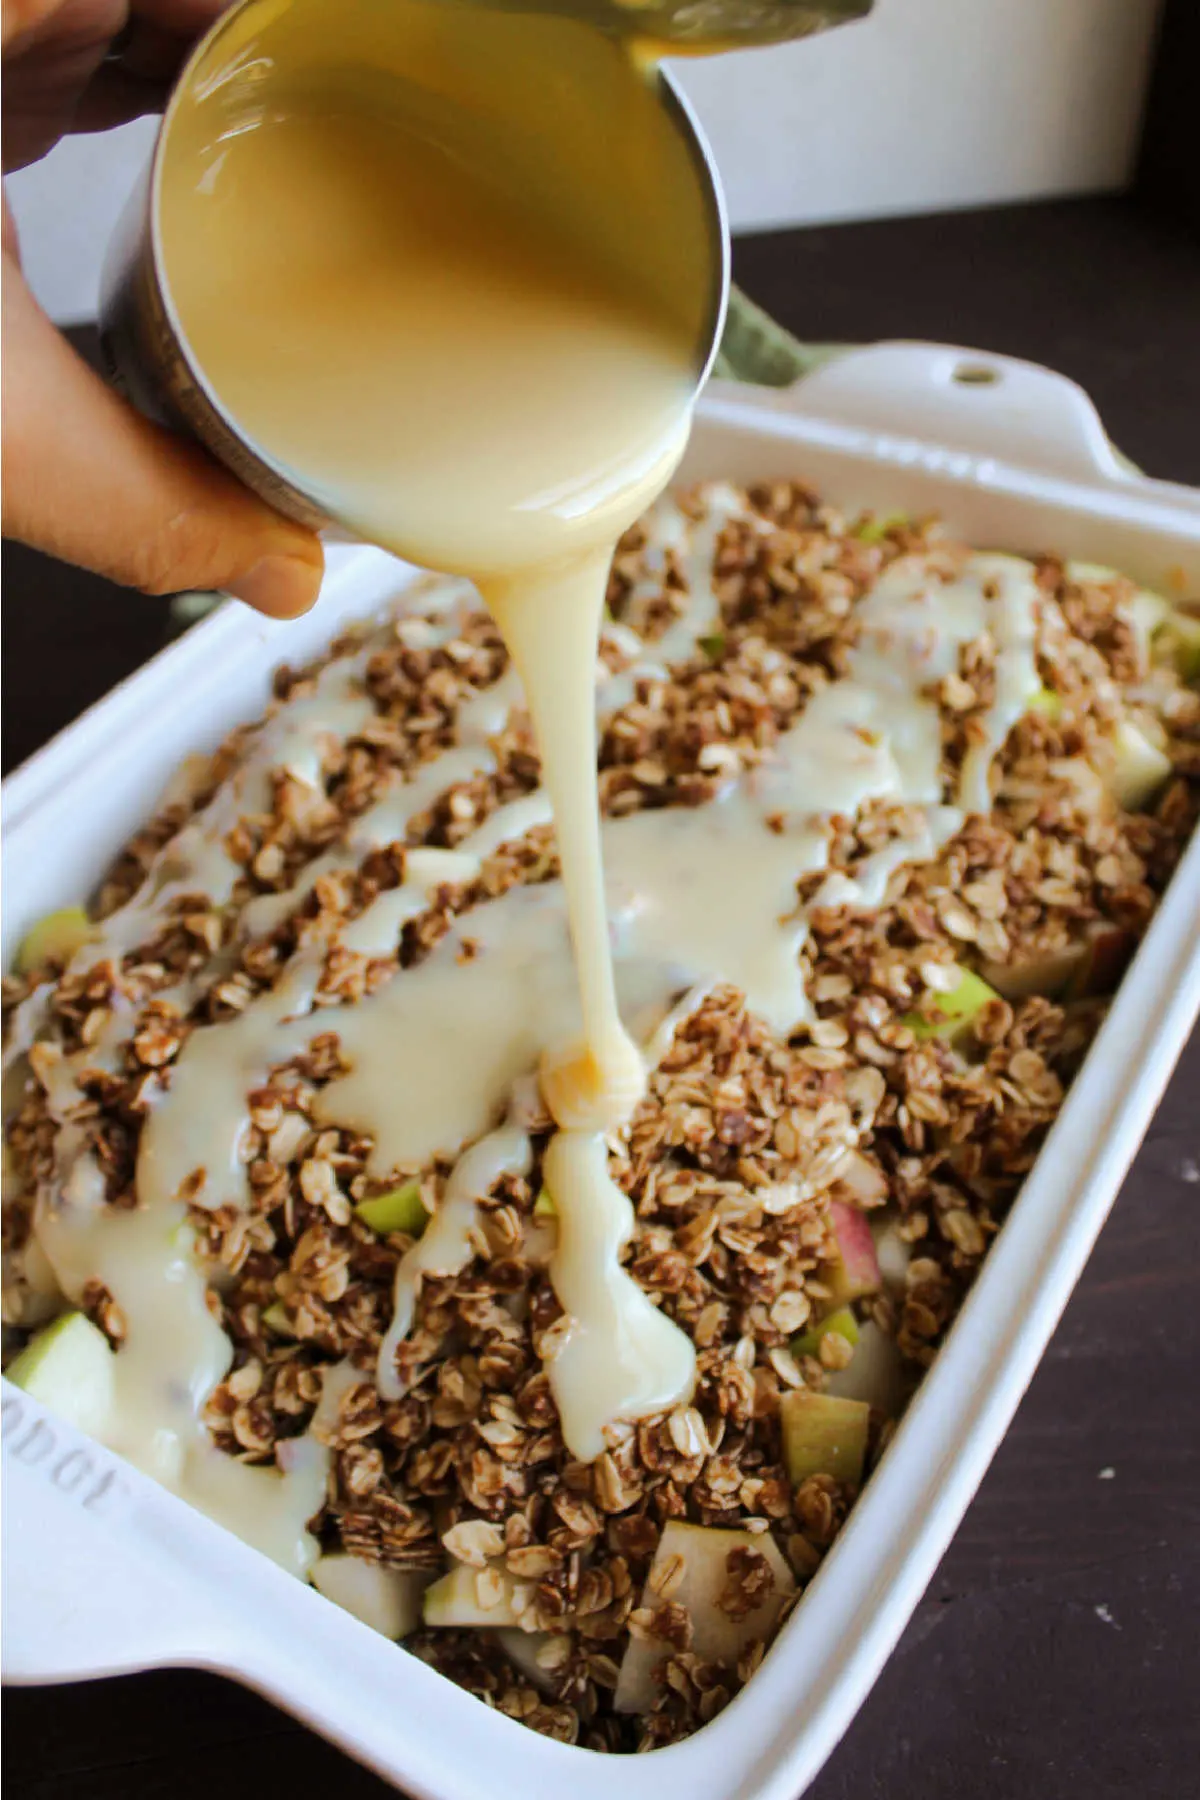 Pouring a can of sweetened condensed milk over apple crisp before it goes in the oven.